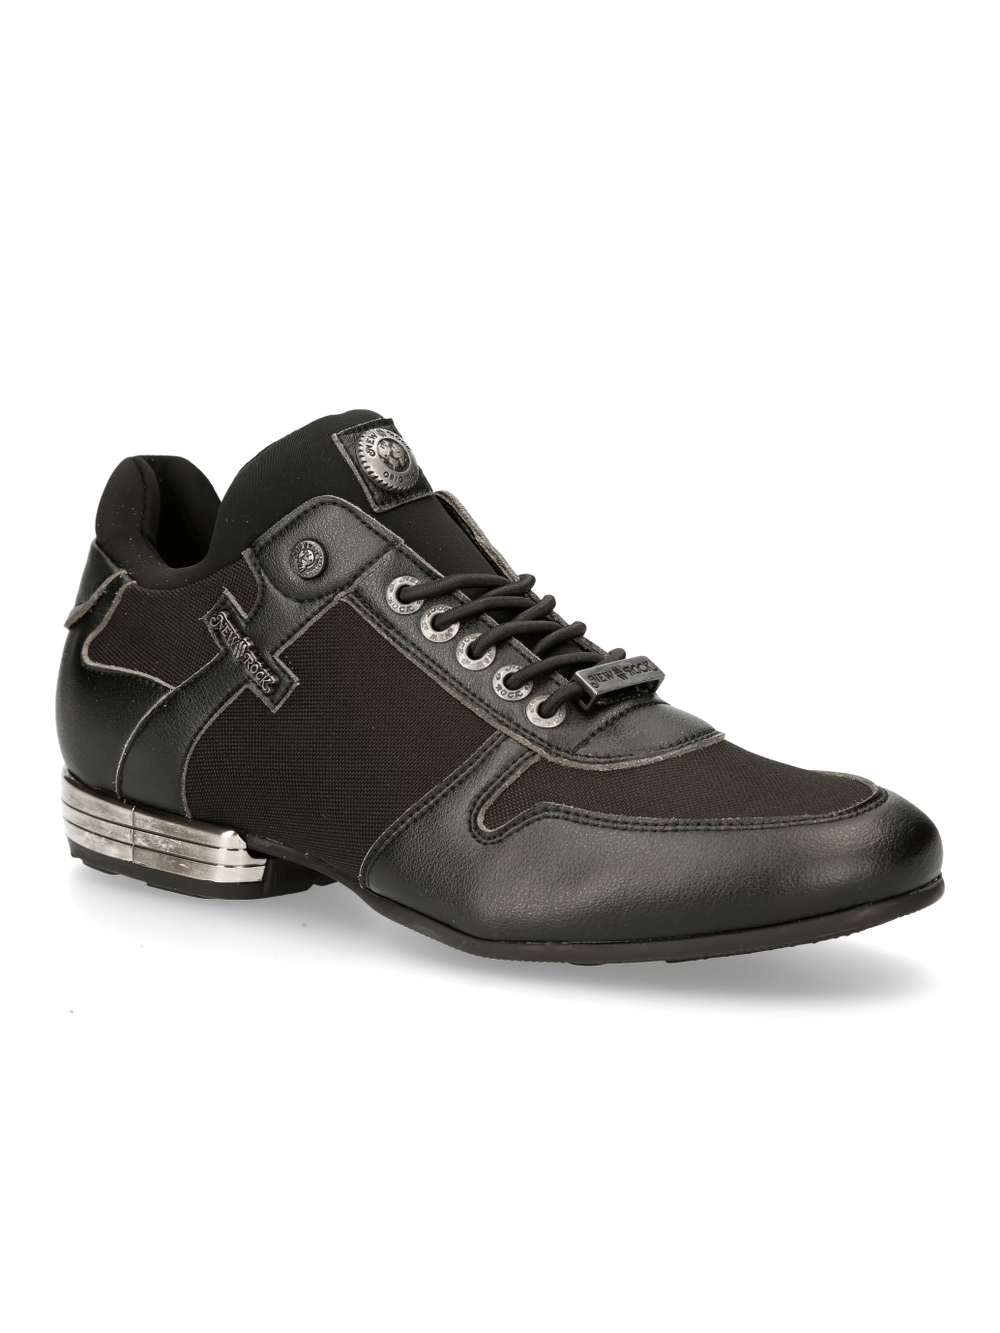 NEW ROCK Black Urban Hybrid Fashion Sneakers With Laces